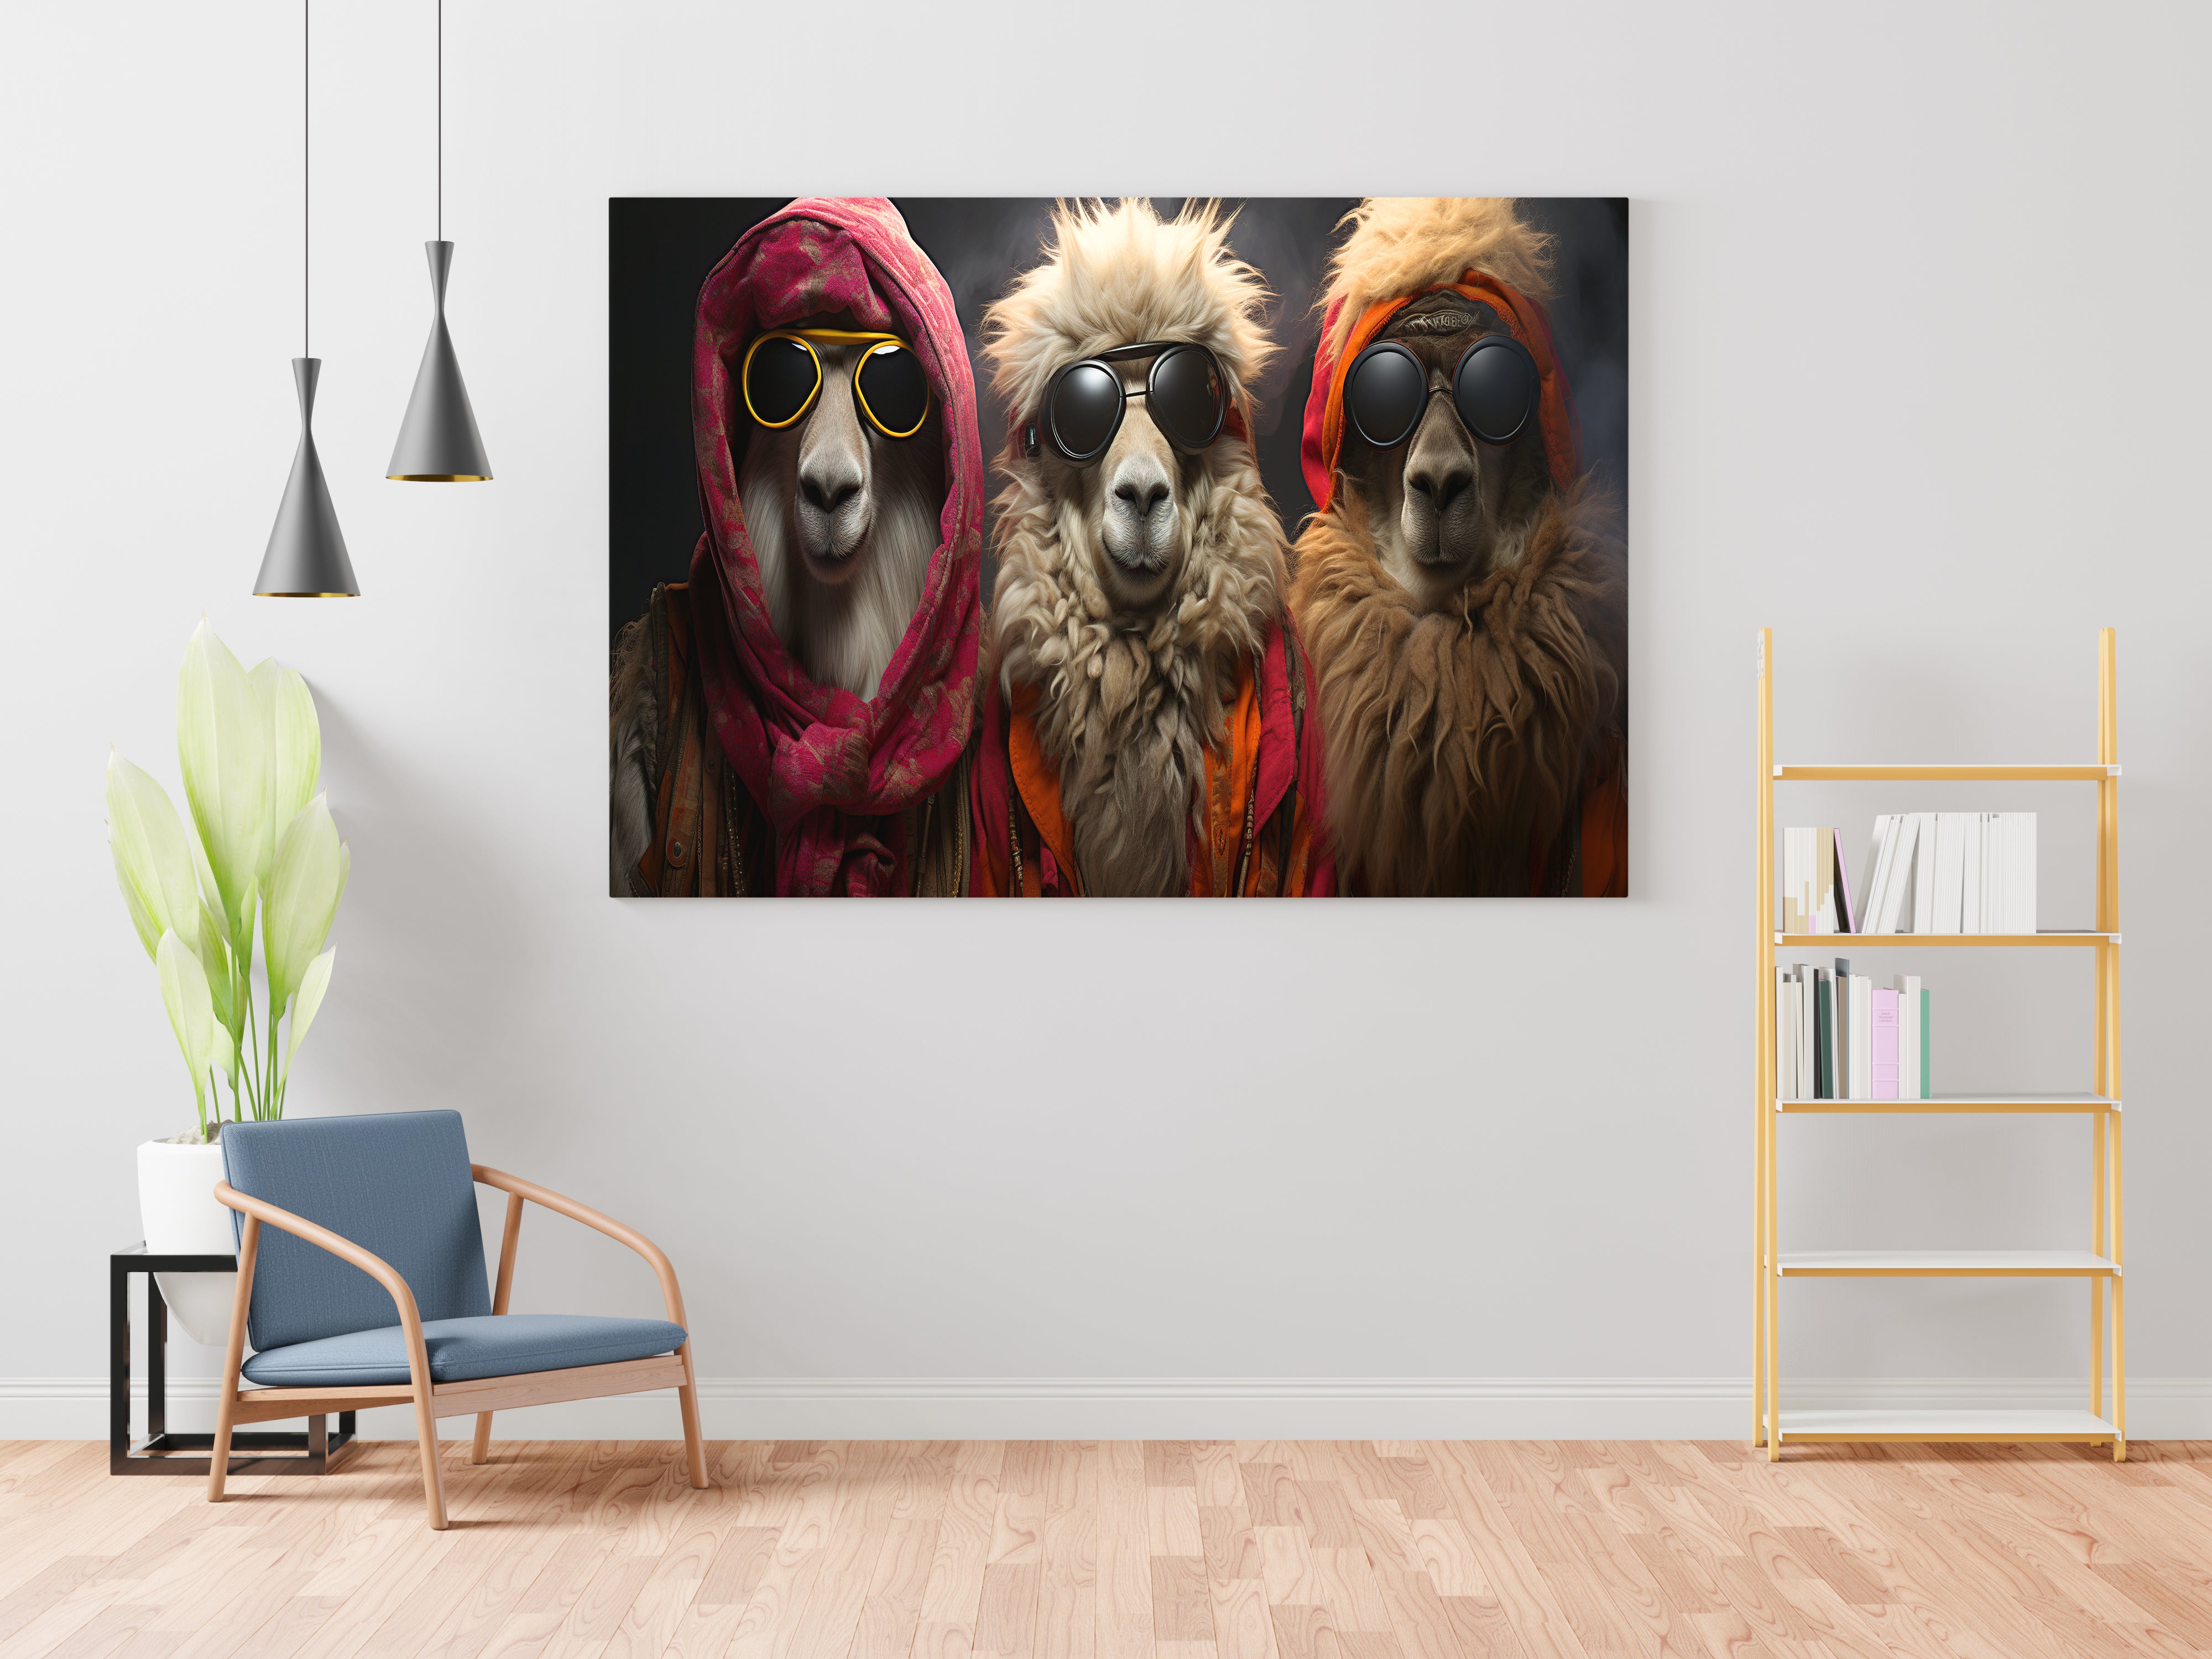 Gentle Goats Canvas Wall Painting